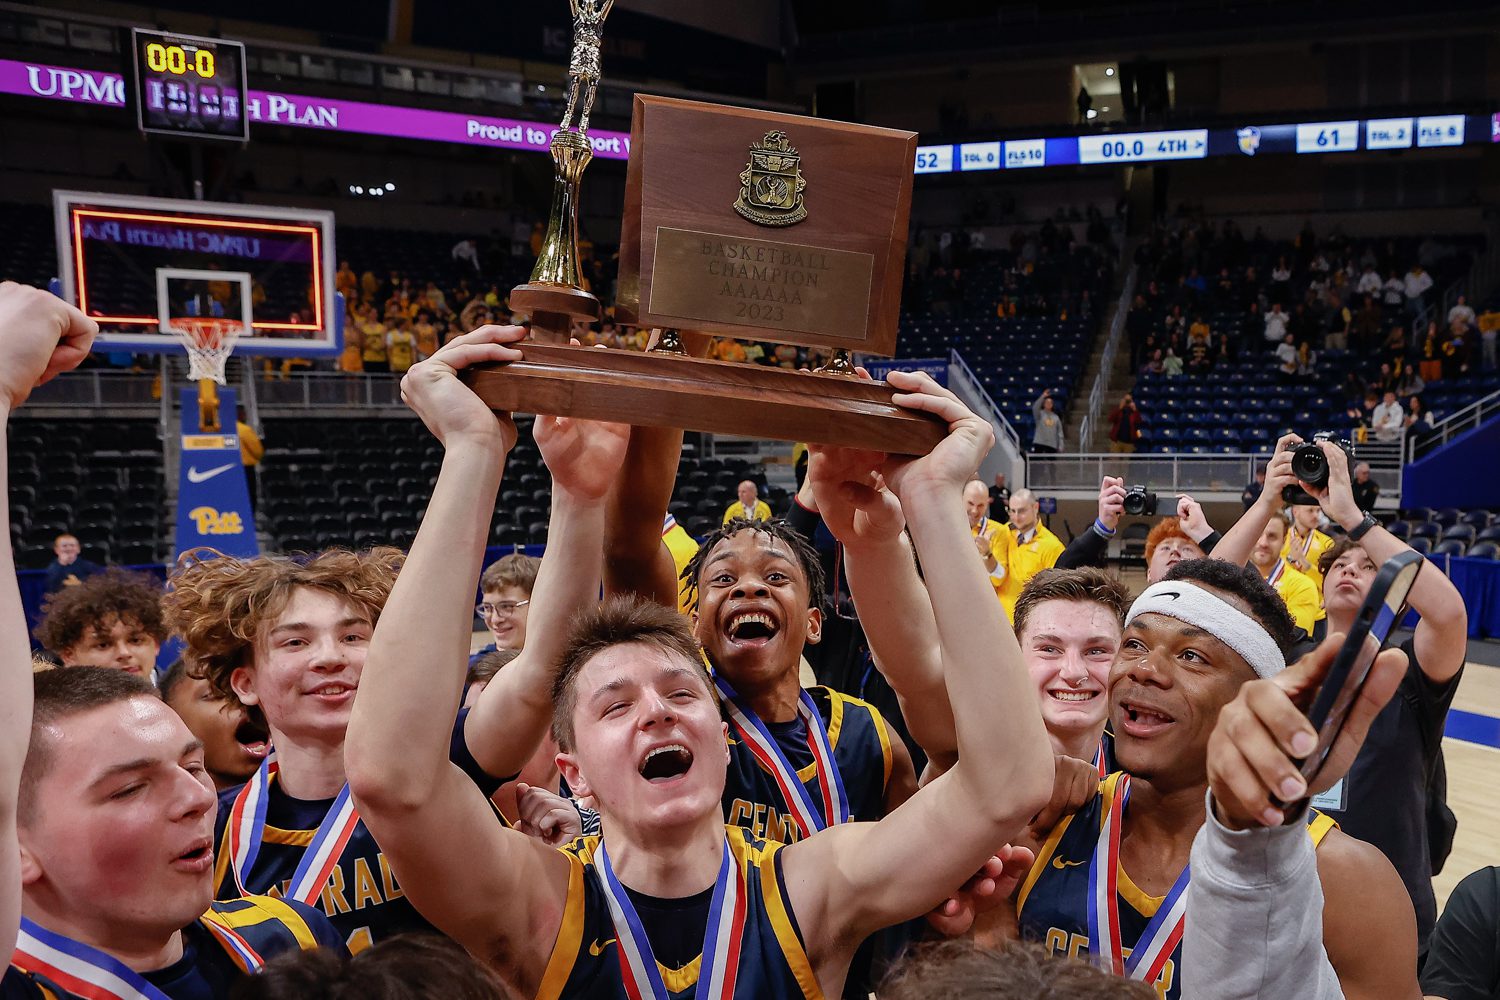 WPIAL Championships gave exclusive streaming rights to NFHS, who have a subscription based package fans can choose from.